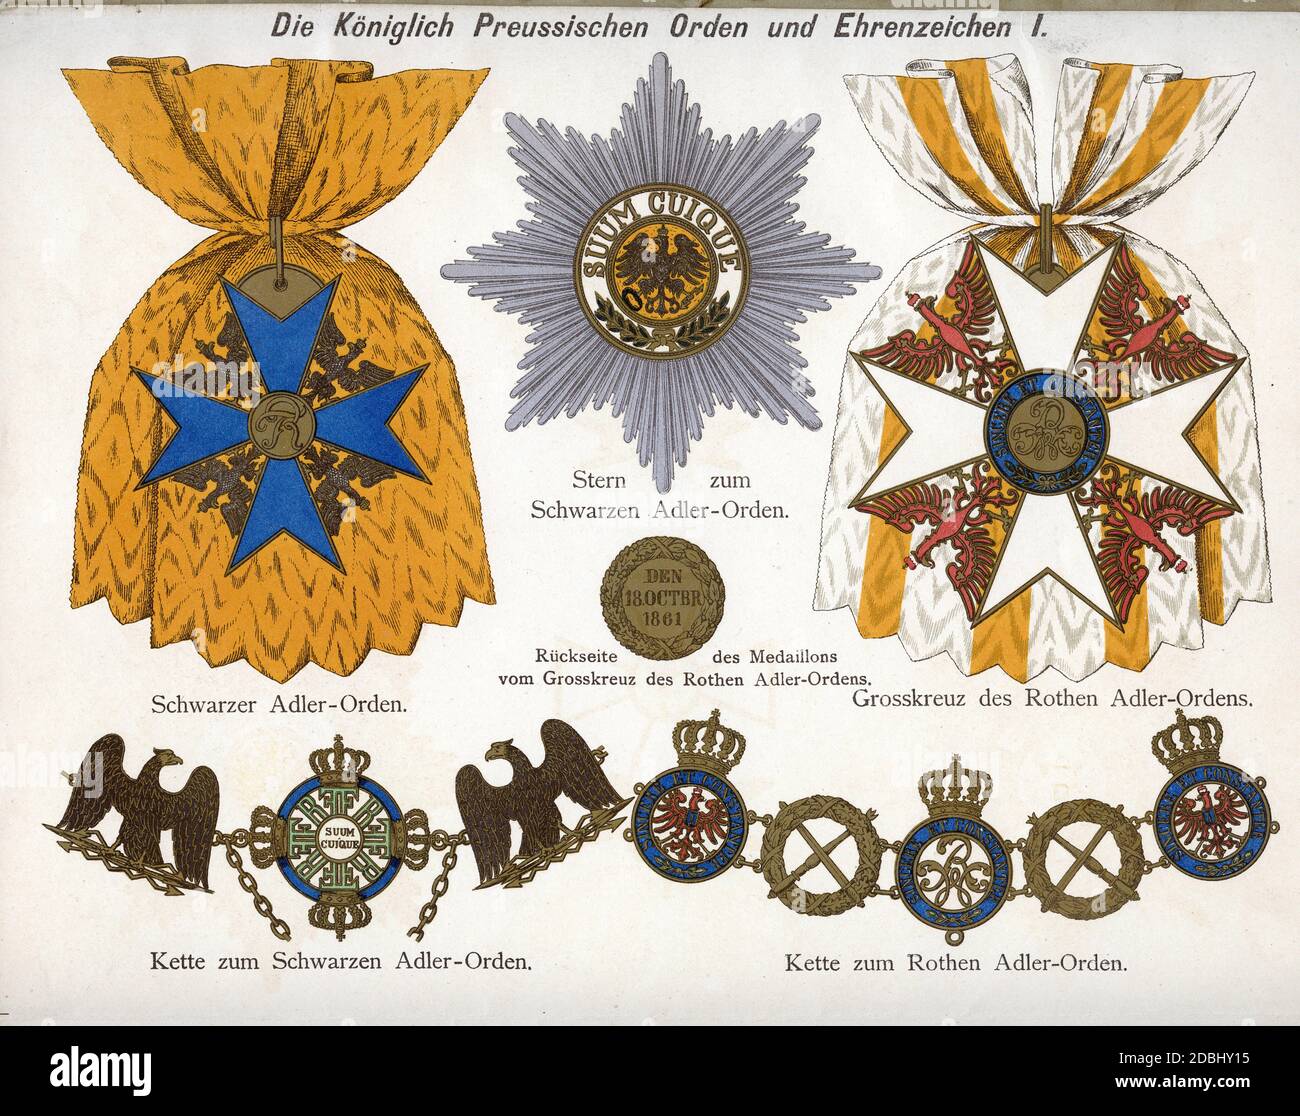 Prussian orders and decorations: Order of the Black Eagle, Star to the  Order of the Black Eagle, reverse of the medallion of the Grand Cross of  the Order of the Red Eagle,